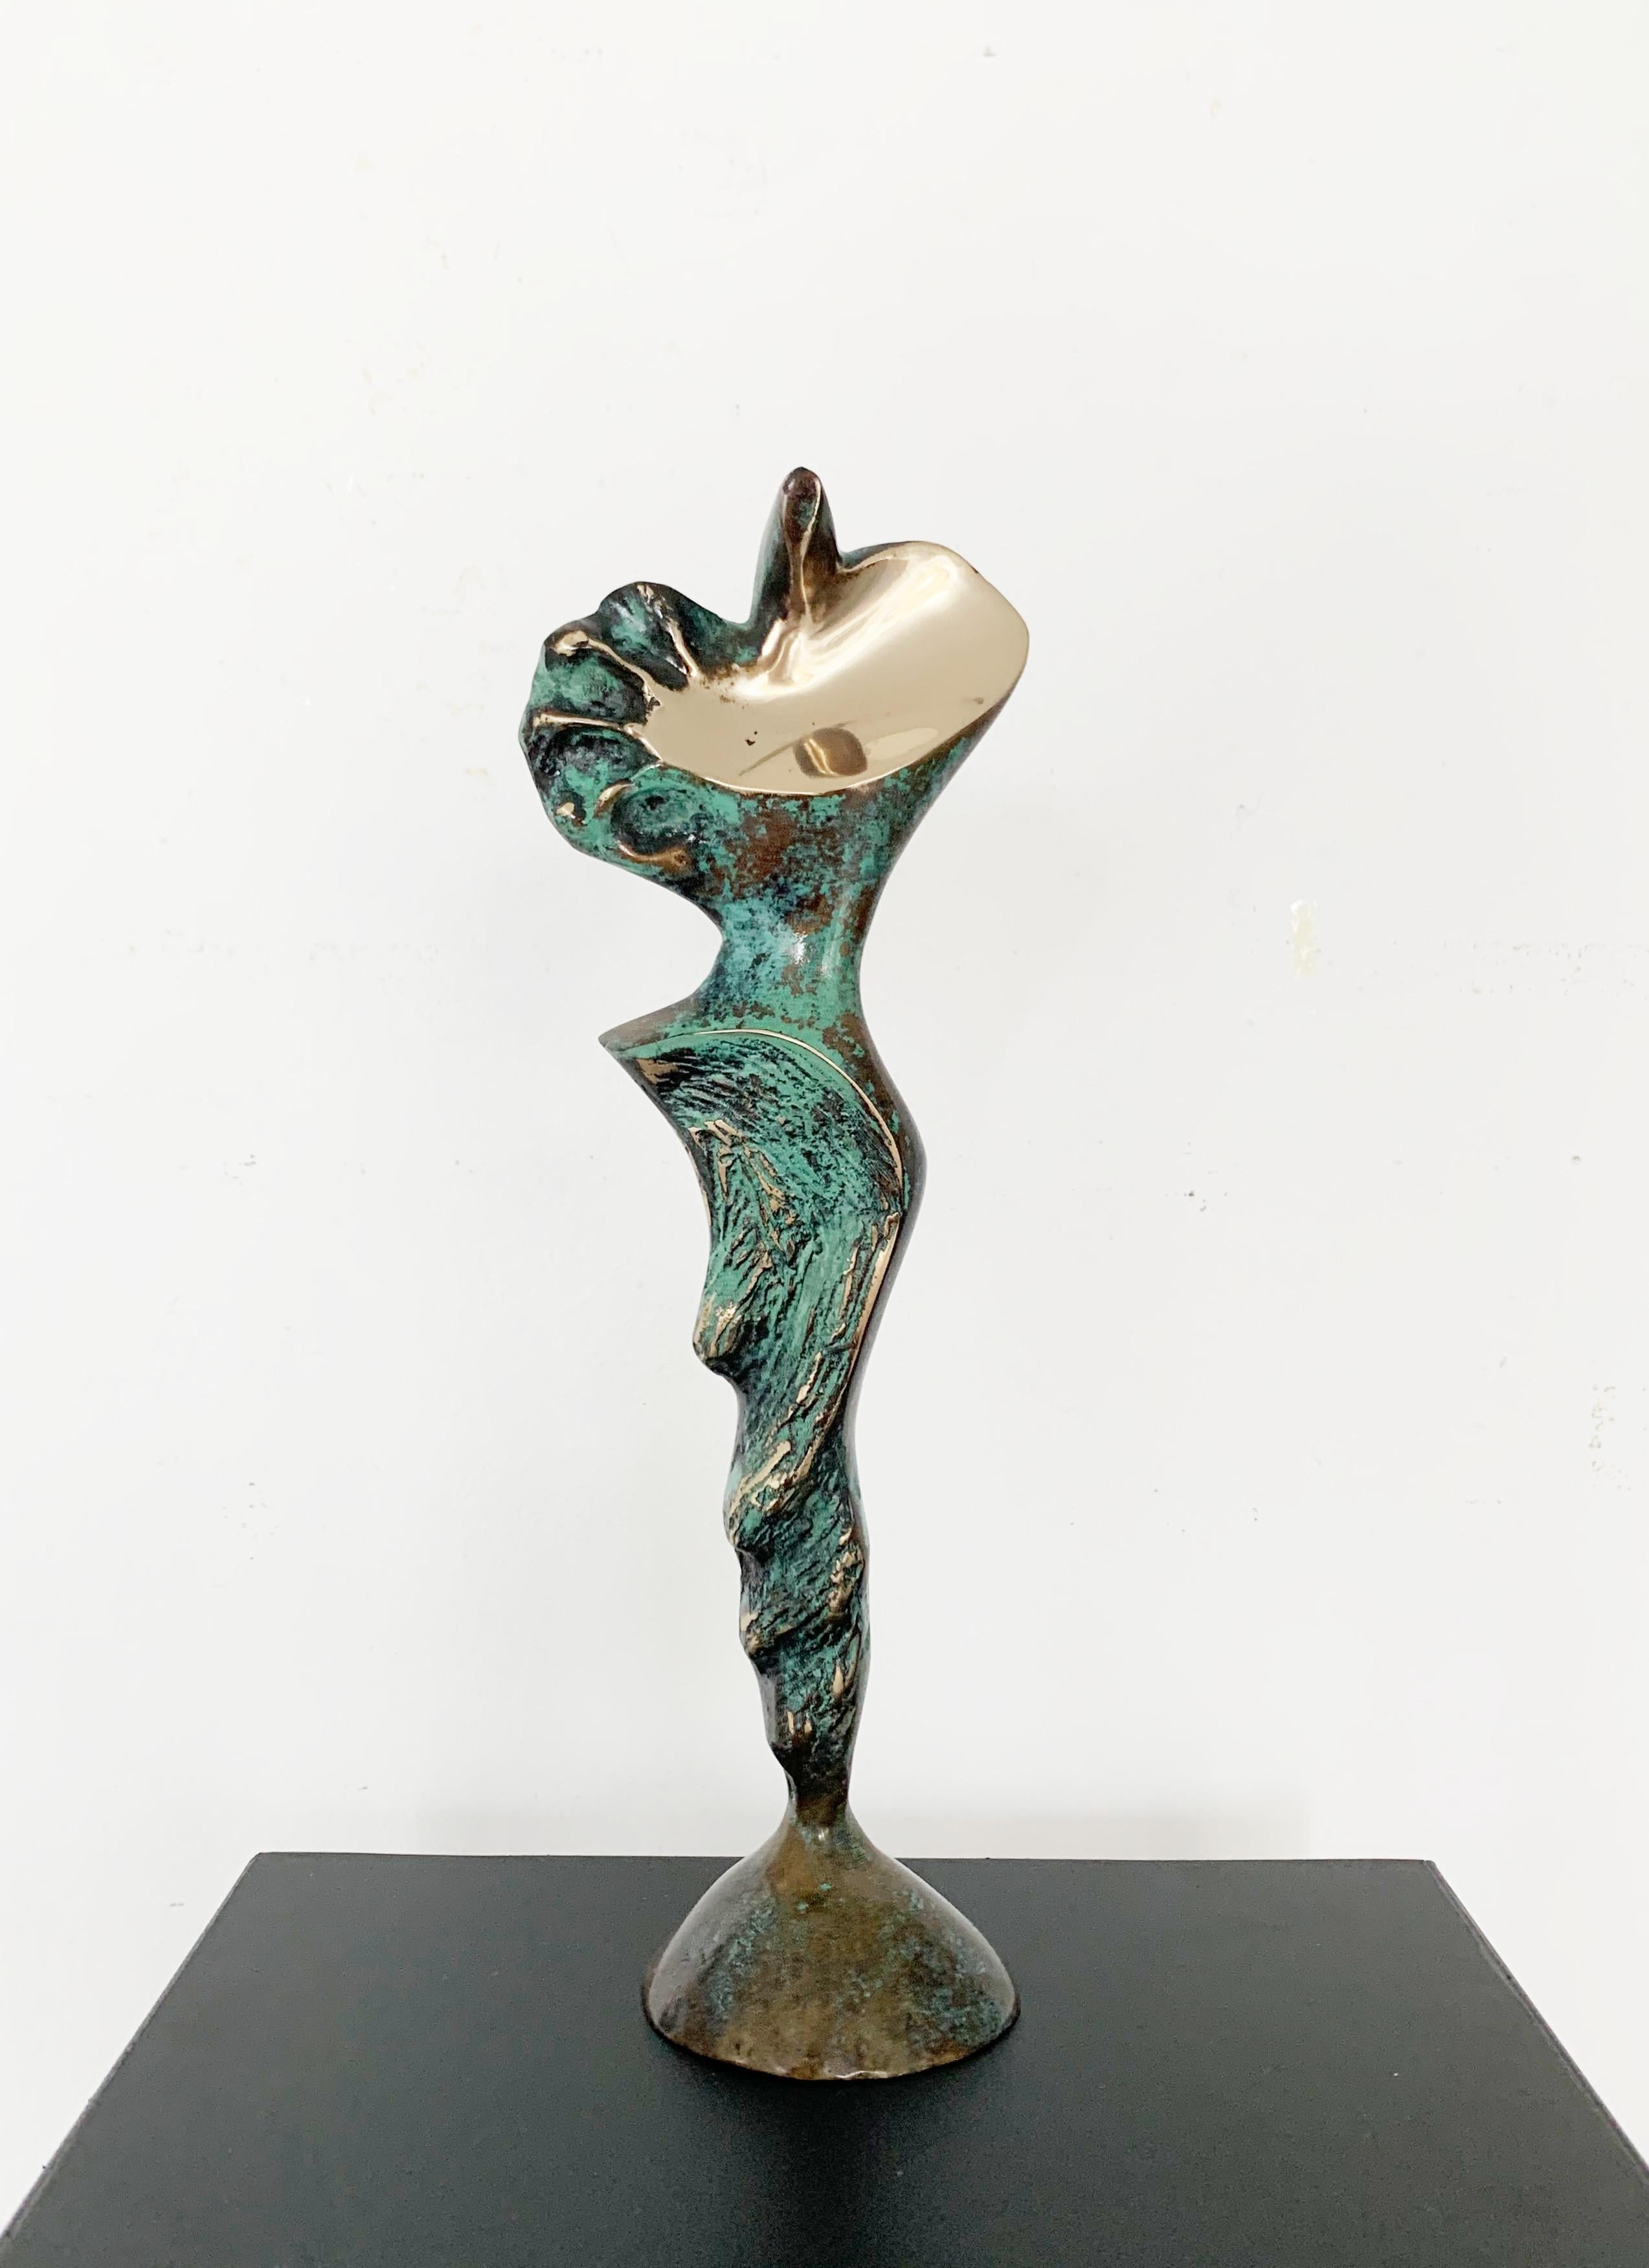 Stanisław Wysocki Abstract Sculpture - A lady. Contemporary bronze sculpture, Abstract & figurative, Polish art